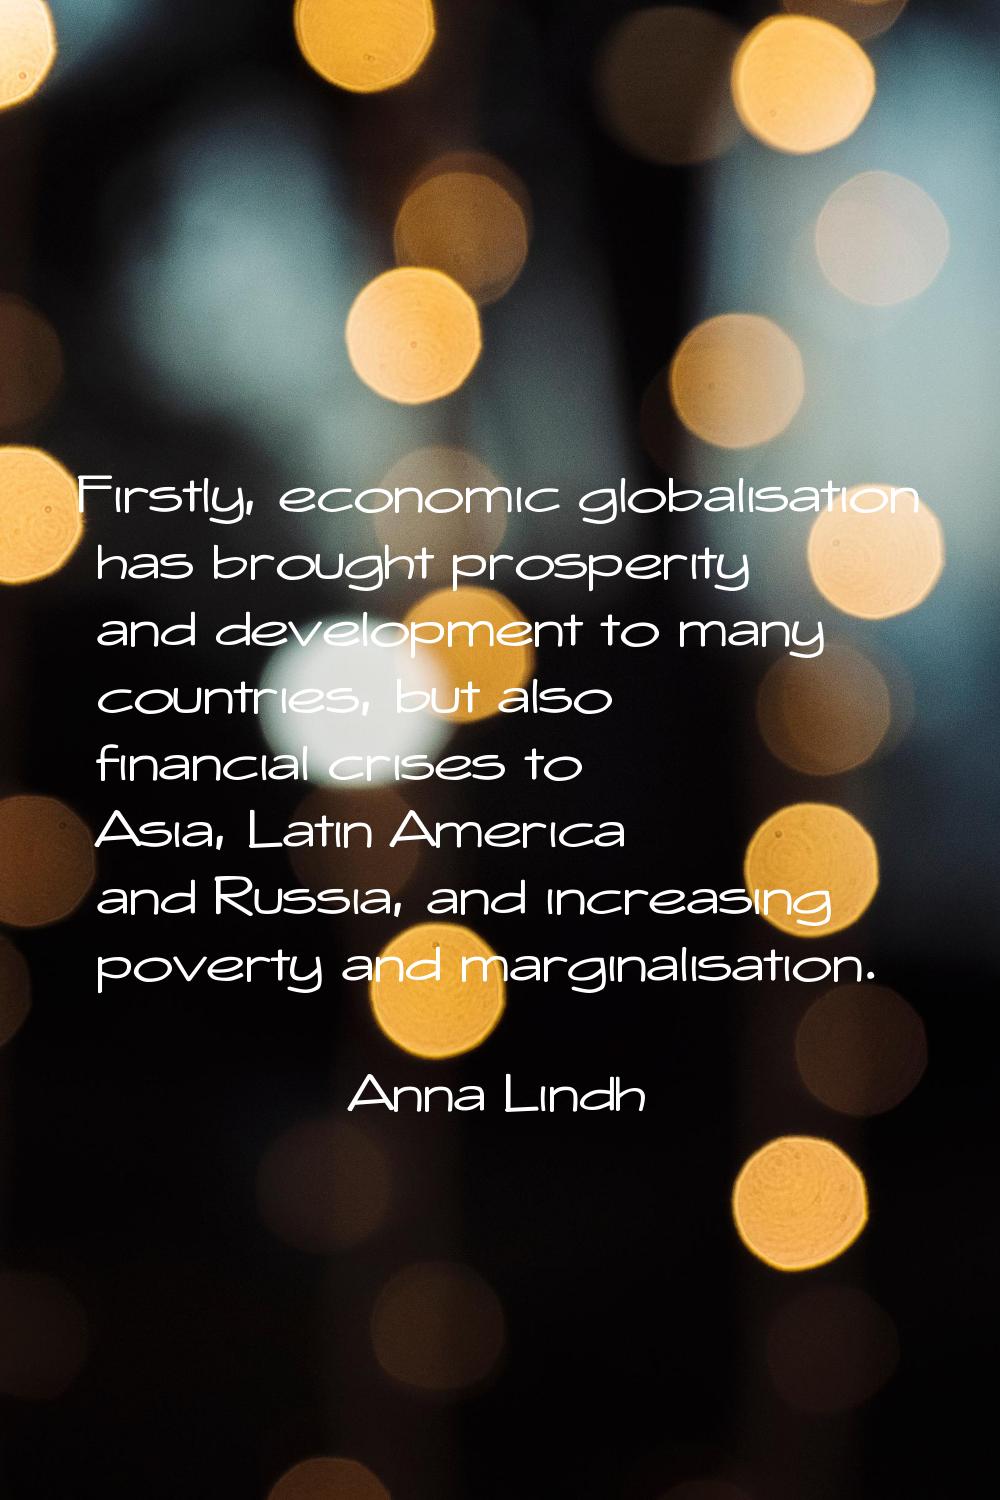 Firstly, economic globalisation has brought prosperity and development to many countries, but also 